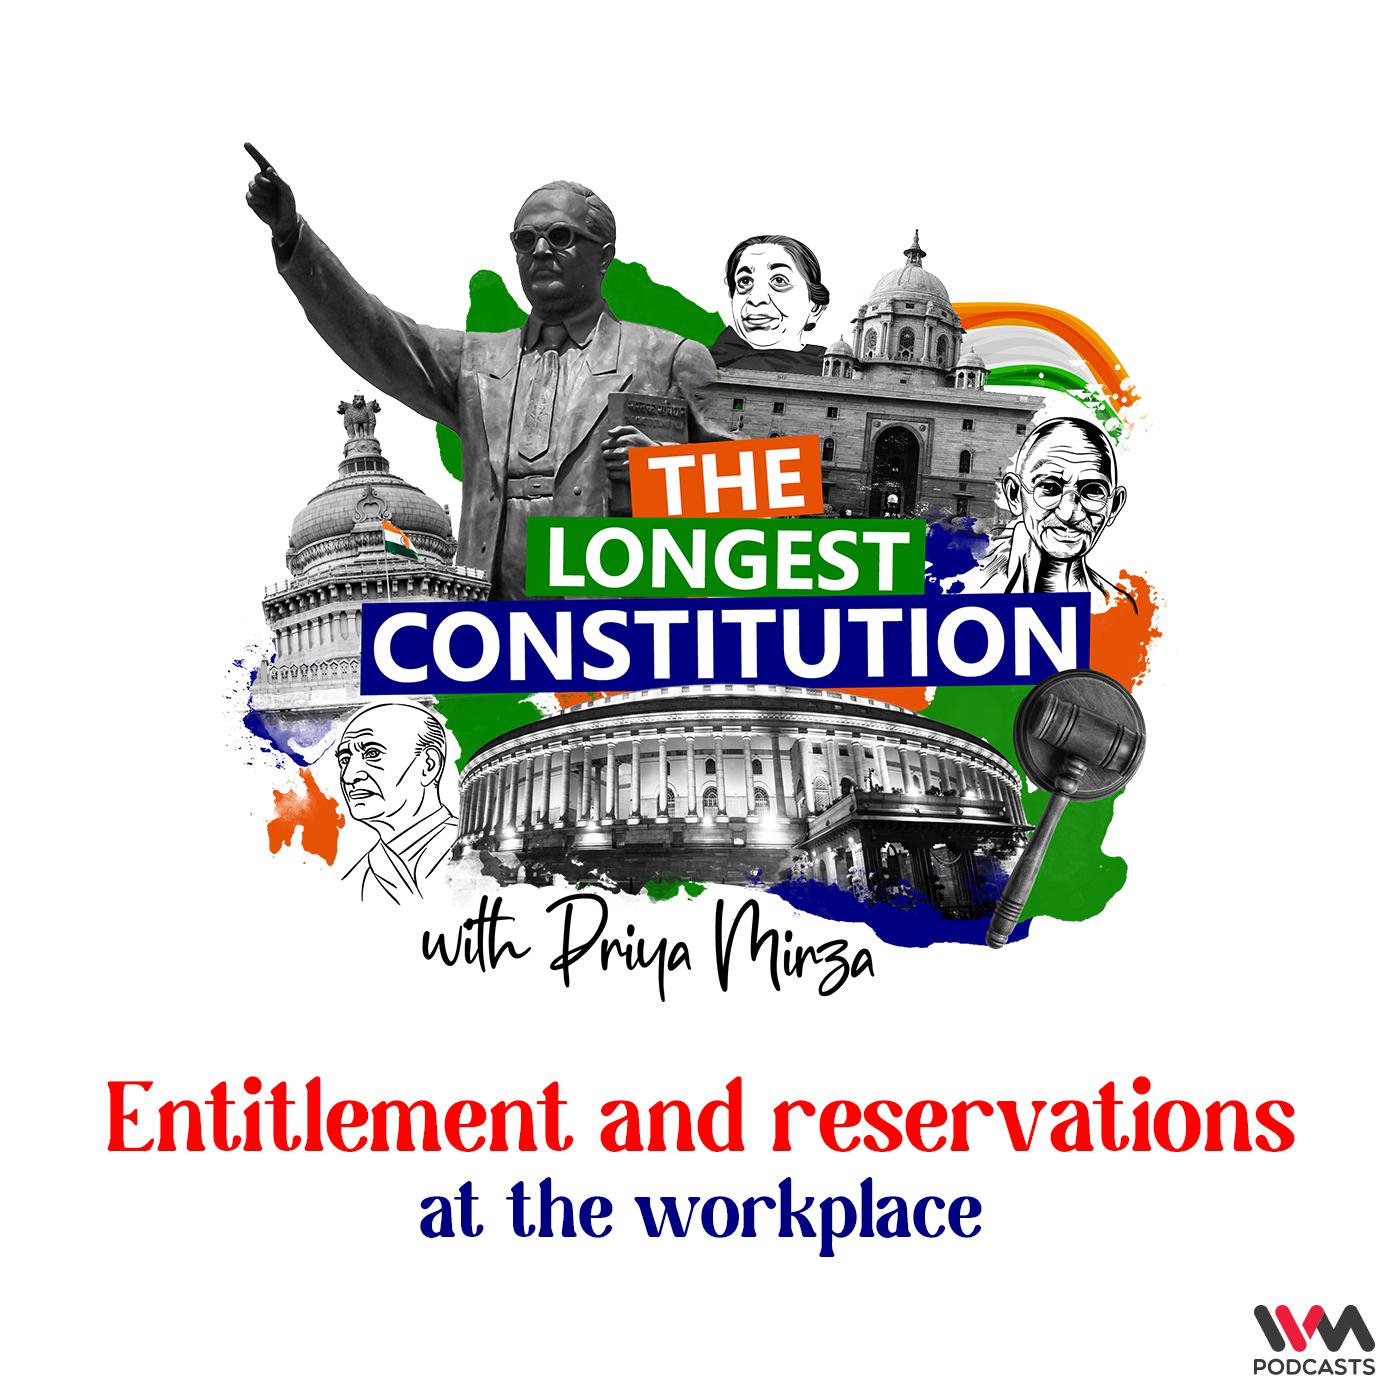 Entitlement and reservations at the workplace